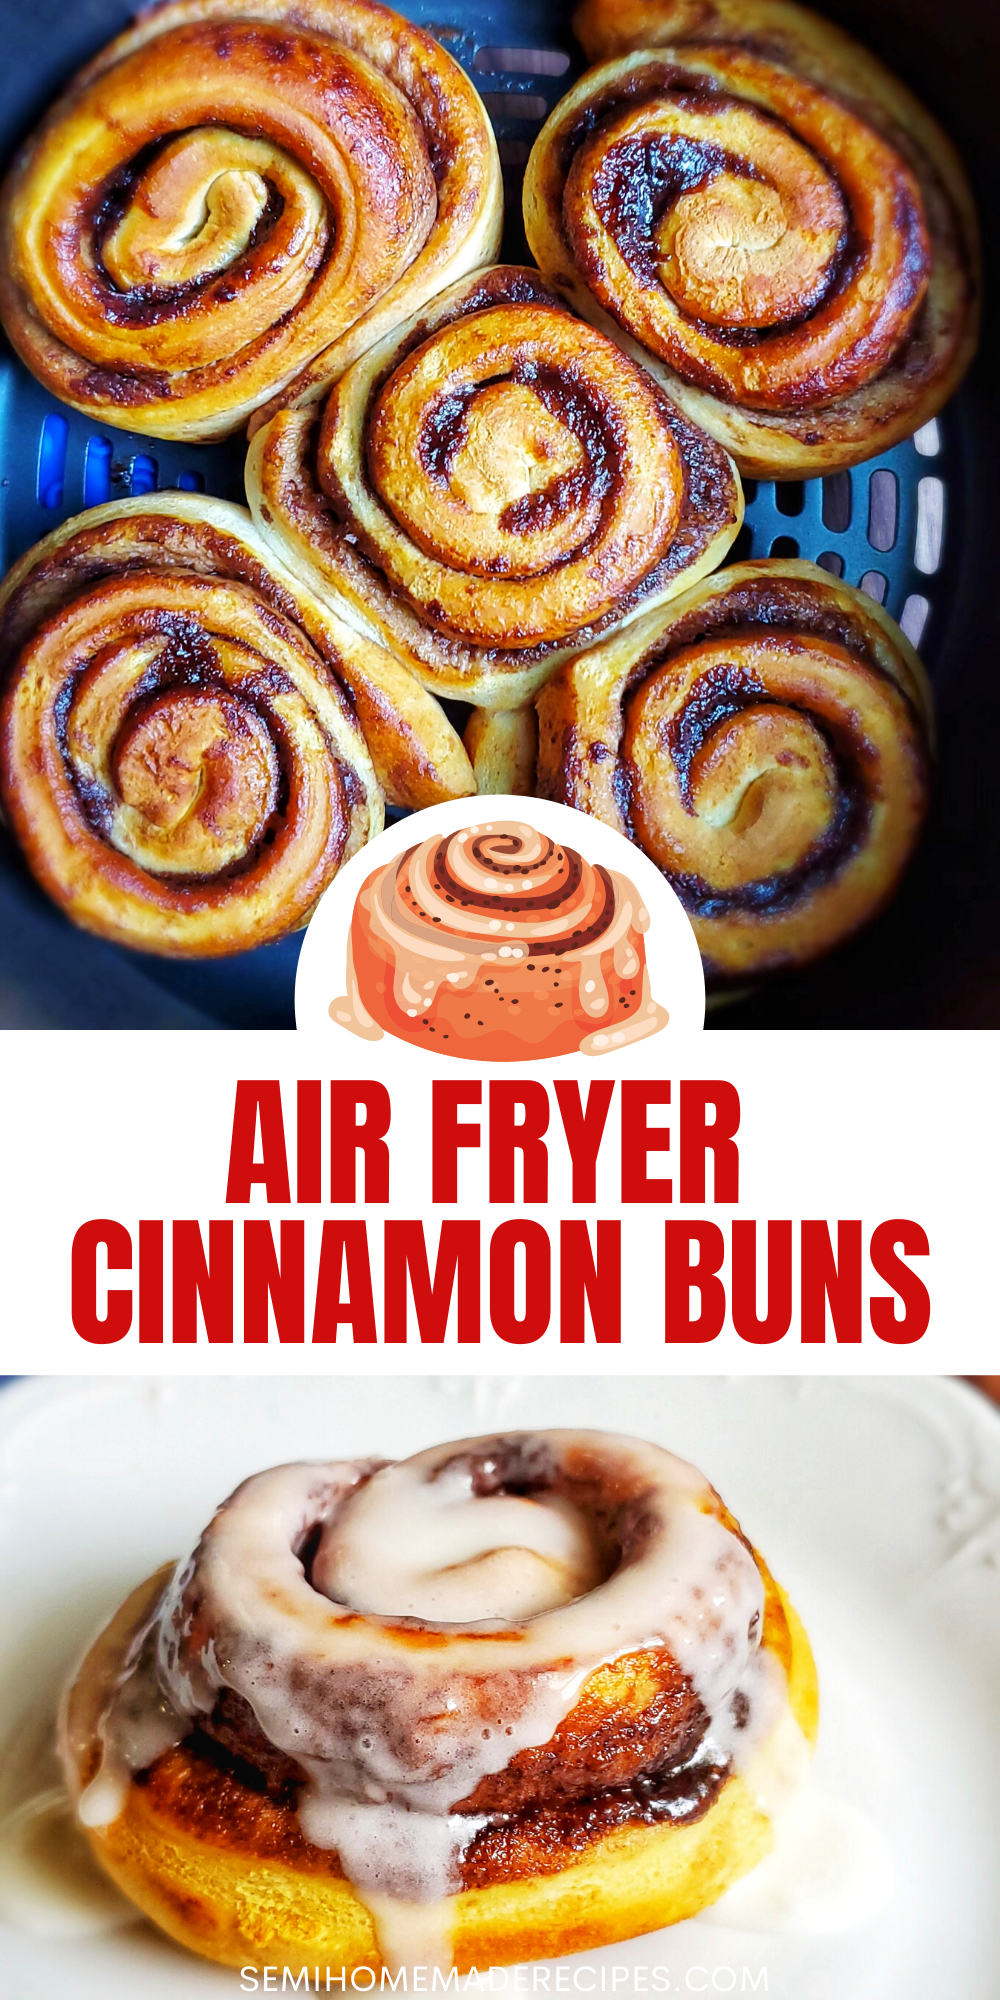 Air Fryer Cinnamon Buns - Use your air fryer for breakfast and makes these super easy Air Fryer Cinnamon Buns! 